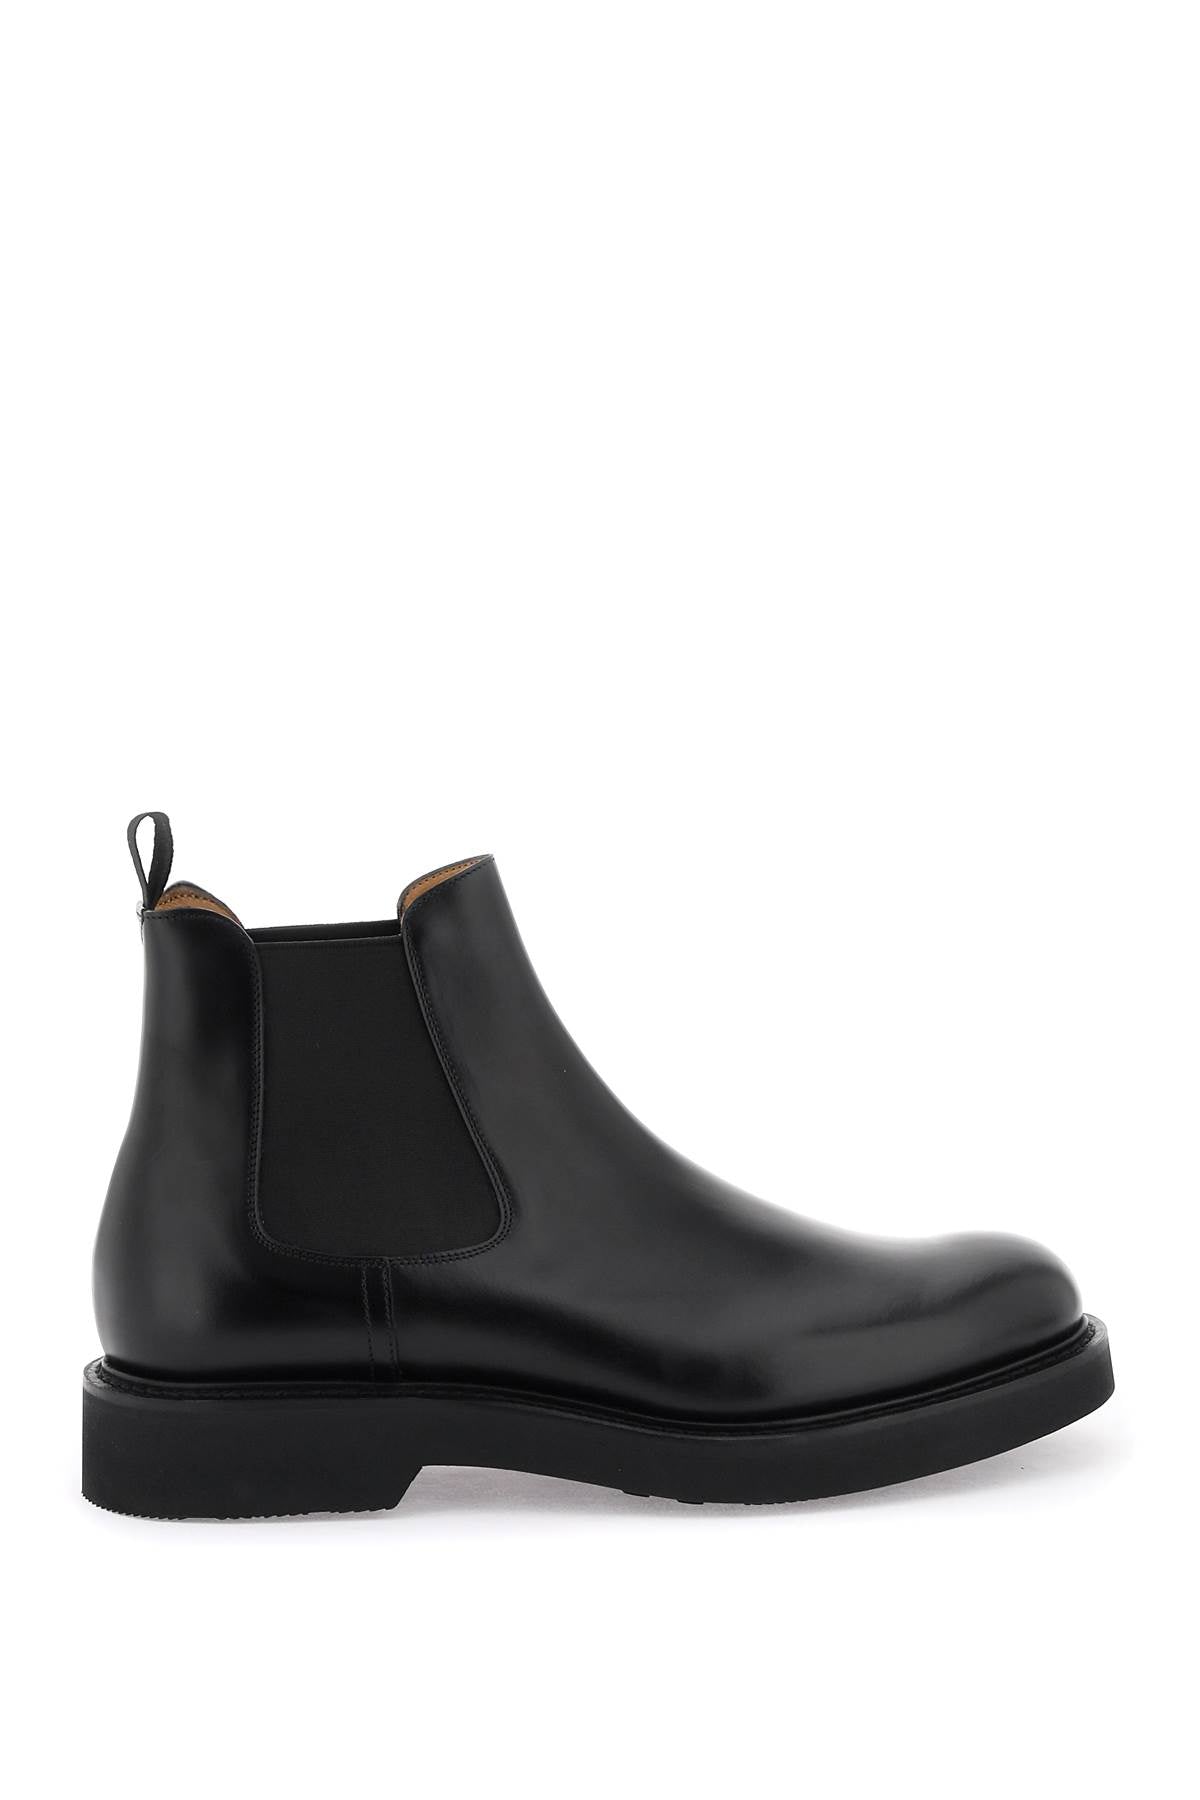 Shop Church's Leather Leicester Chelsea Boots Men In Black